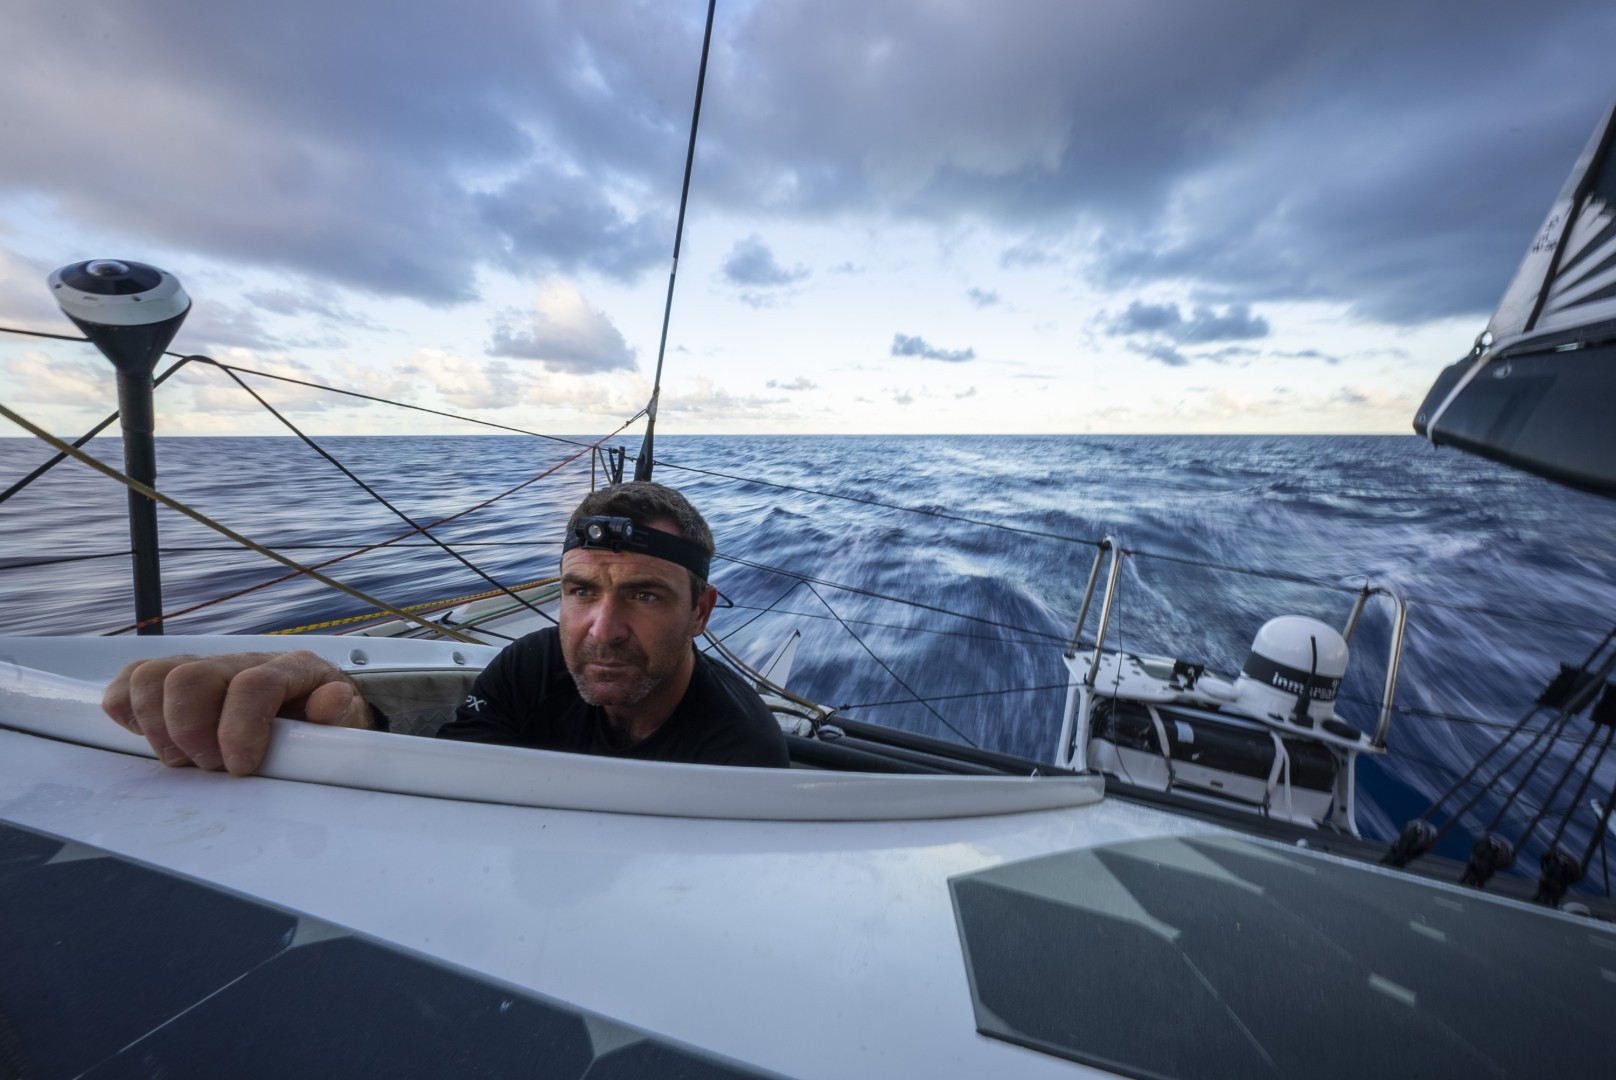 The Ocean Race 2022-23 - 28 April 2023, Leg 4 Day 5 onboard 11th Hour Racing Team. Charlie Enright keeps tabs on the weather outside in tricky conditions.
© Amory Ross / 11th Hour Racing / The Ocean Race